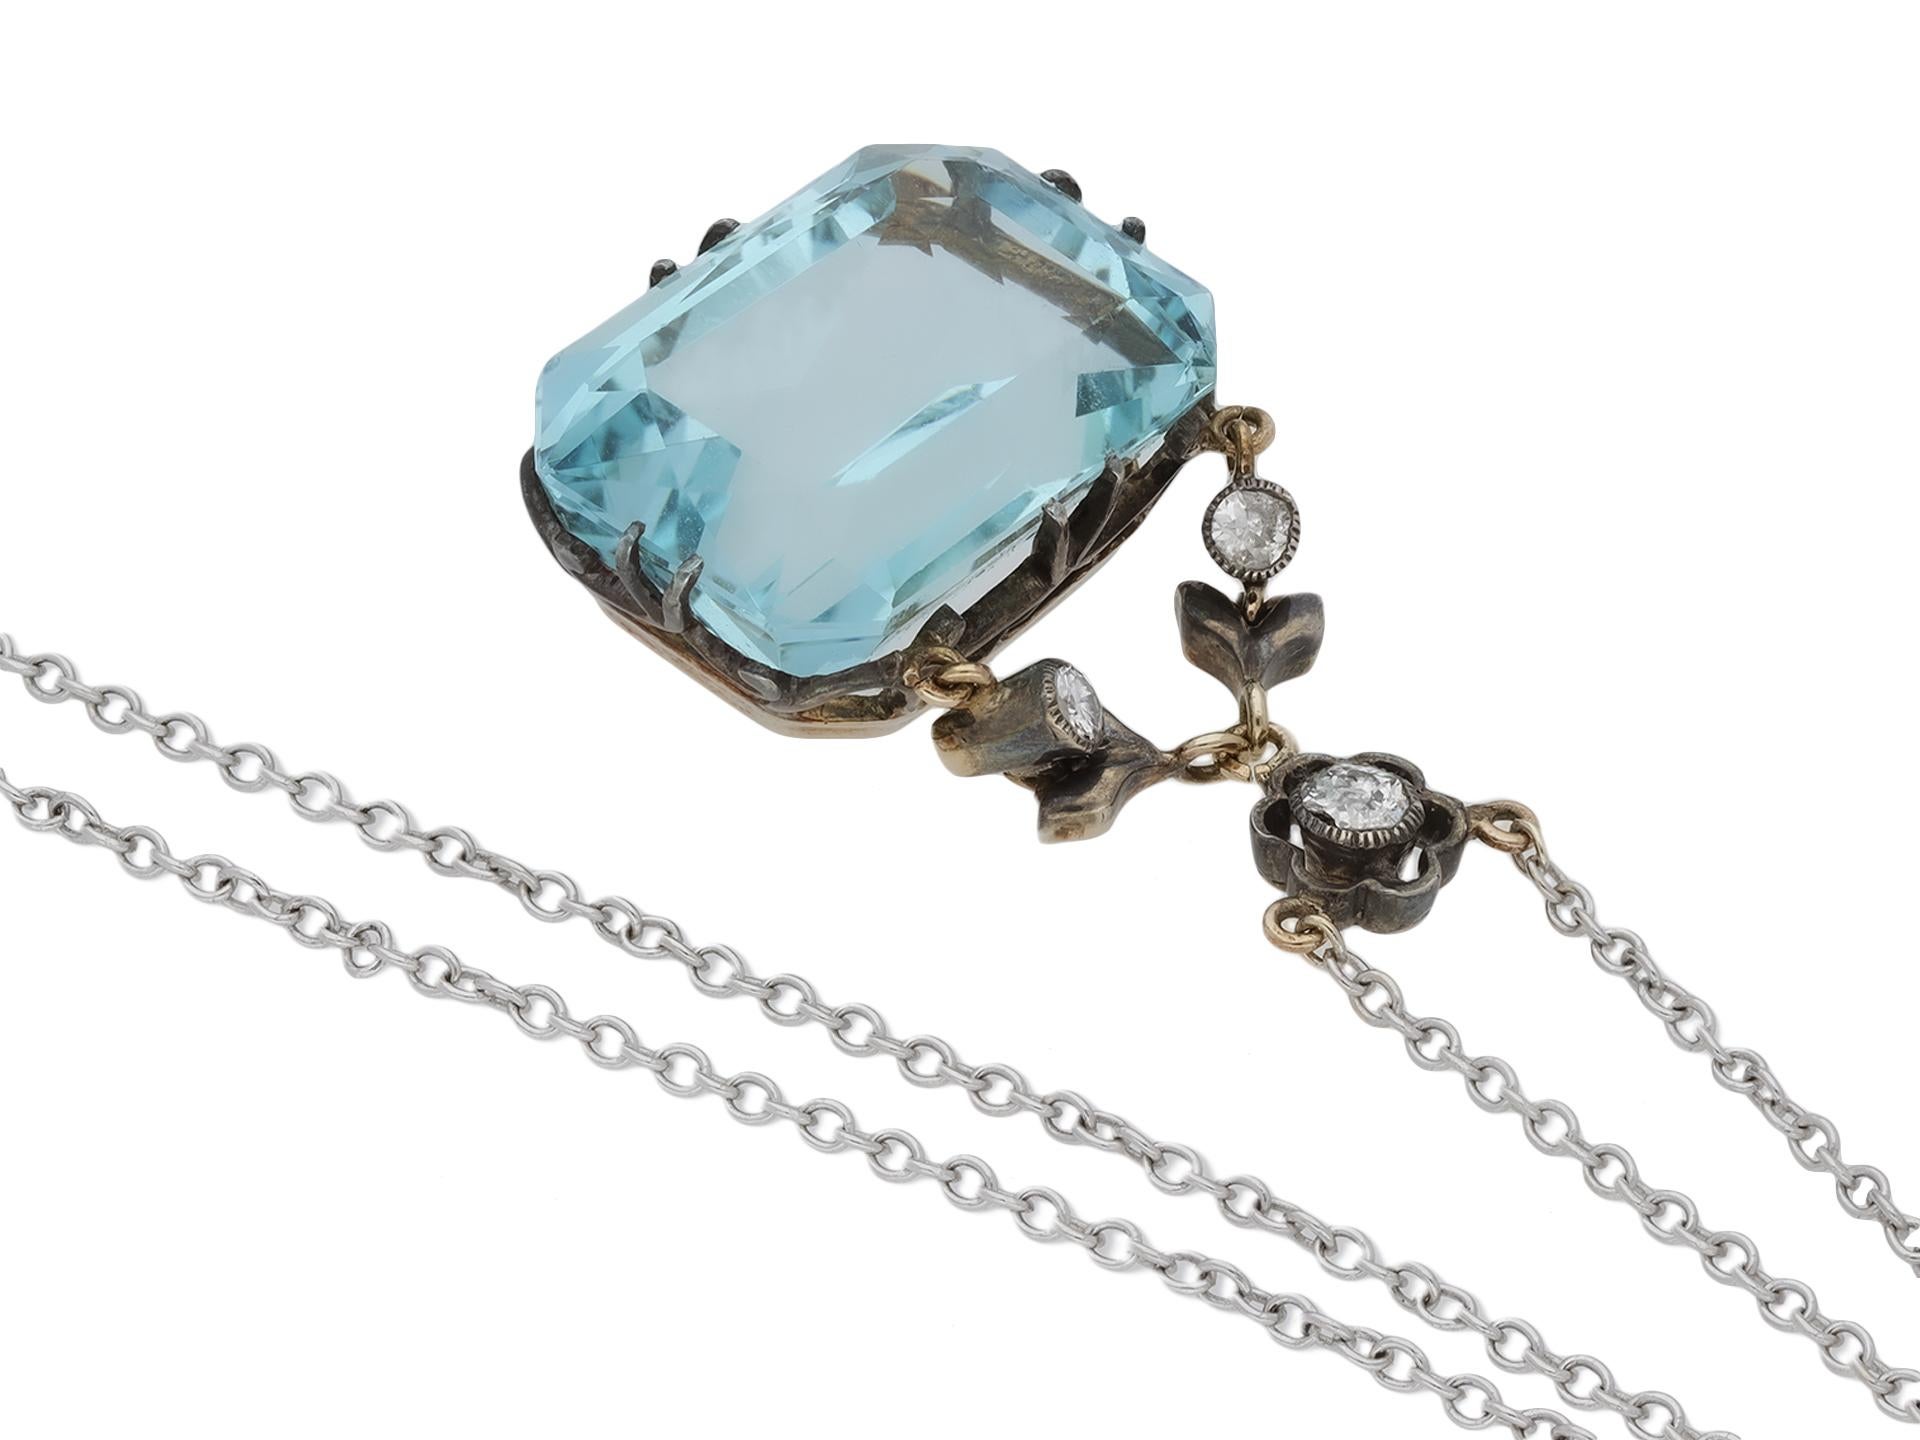 Aquamarine and diamond pendant. Set with one octagonal scissor cut natural unenhanced aquamarine in an open back split claw setting with an approximate weight of 17.00 carats, set to top with three round old cut diamonds in open back rubover